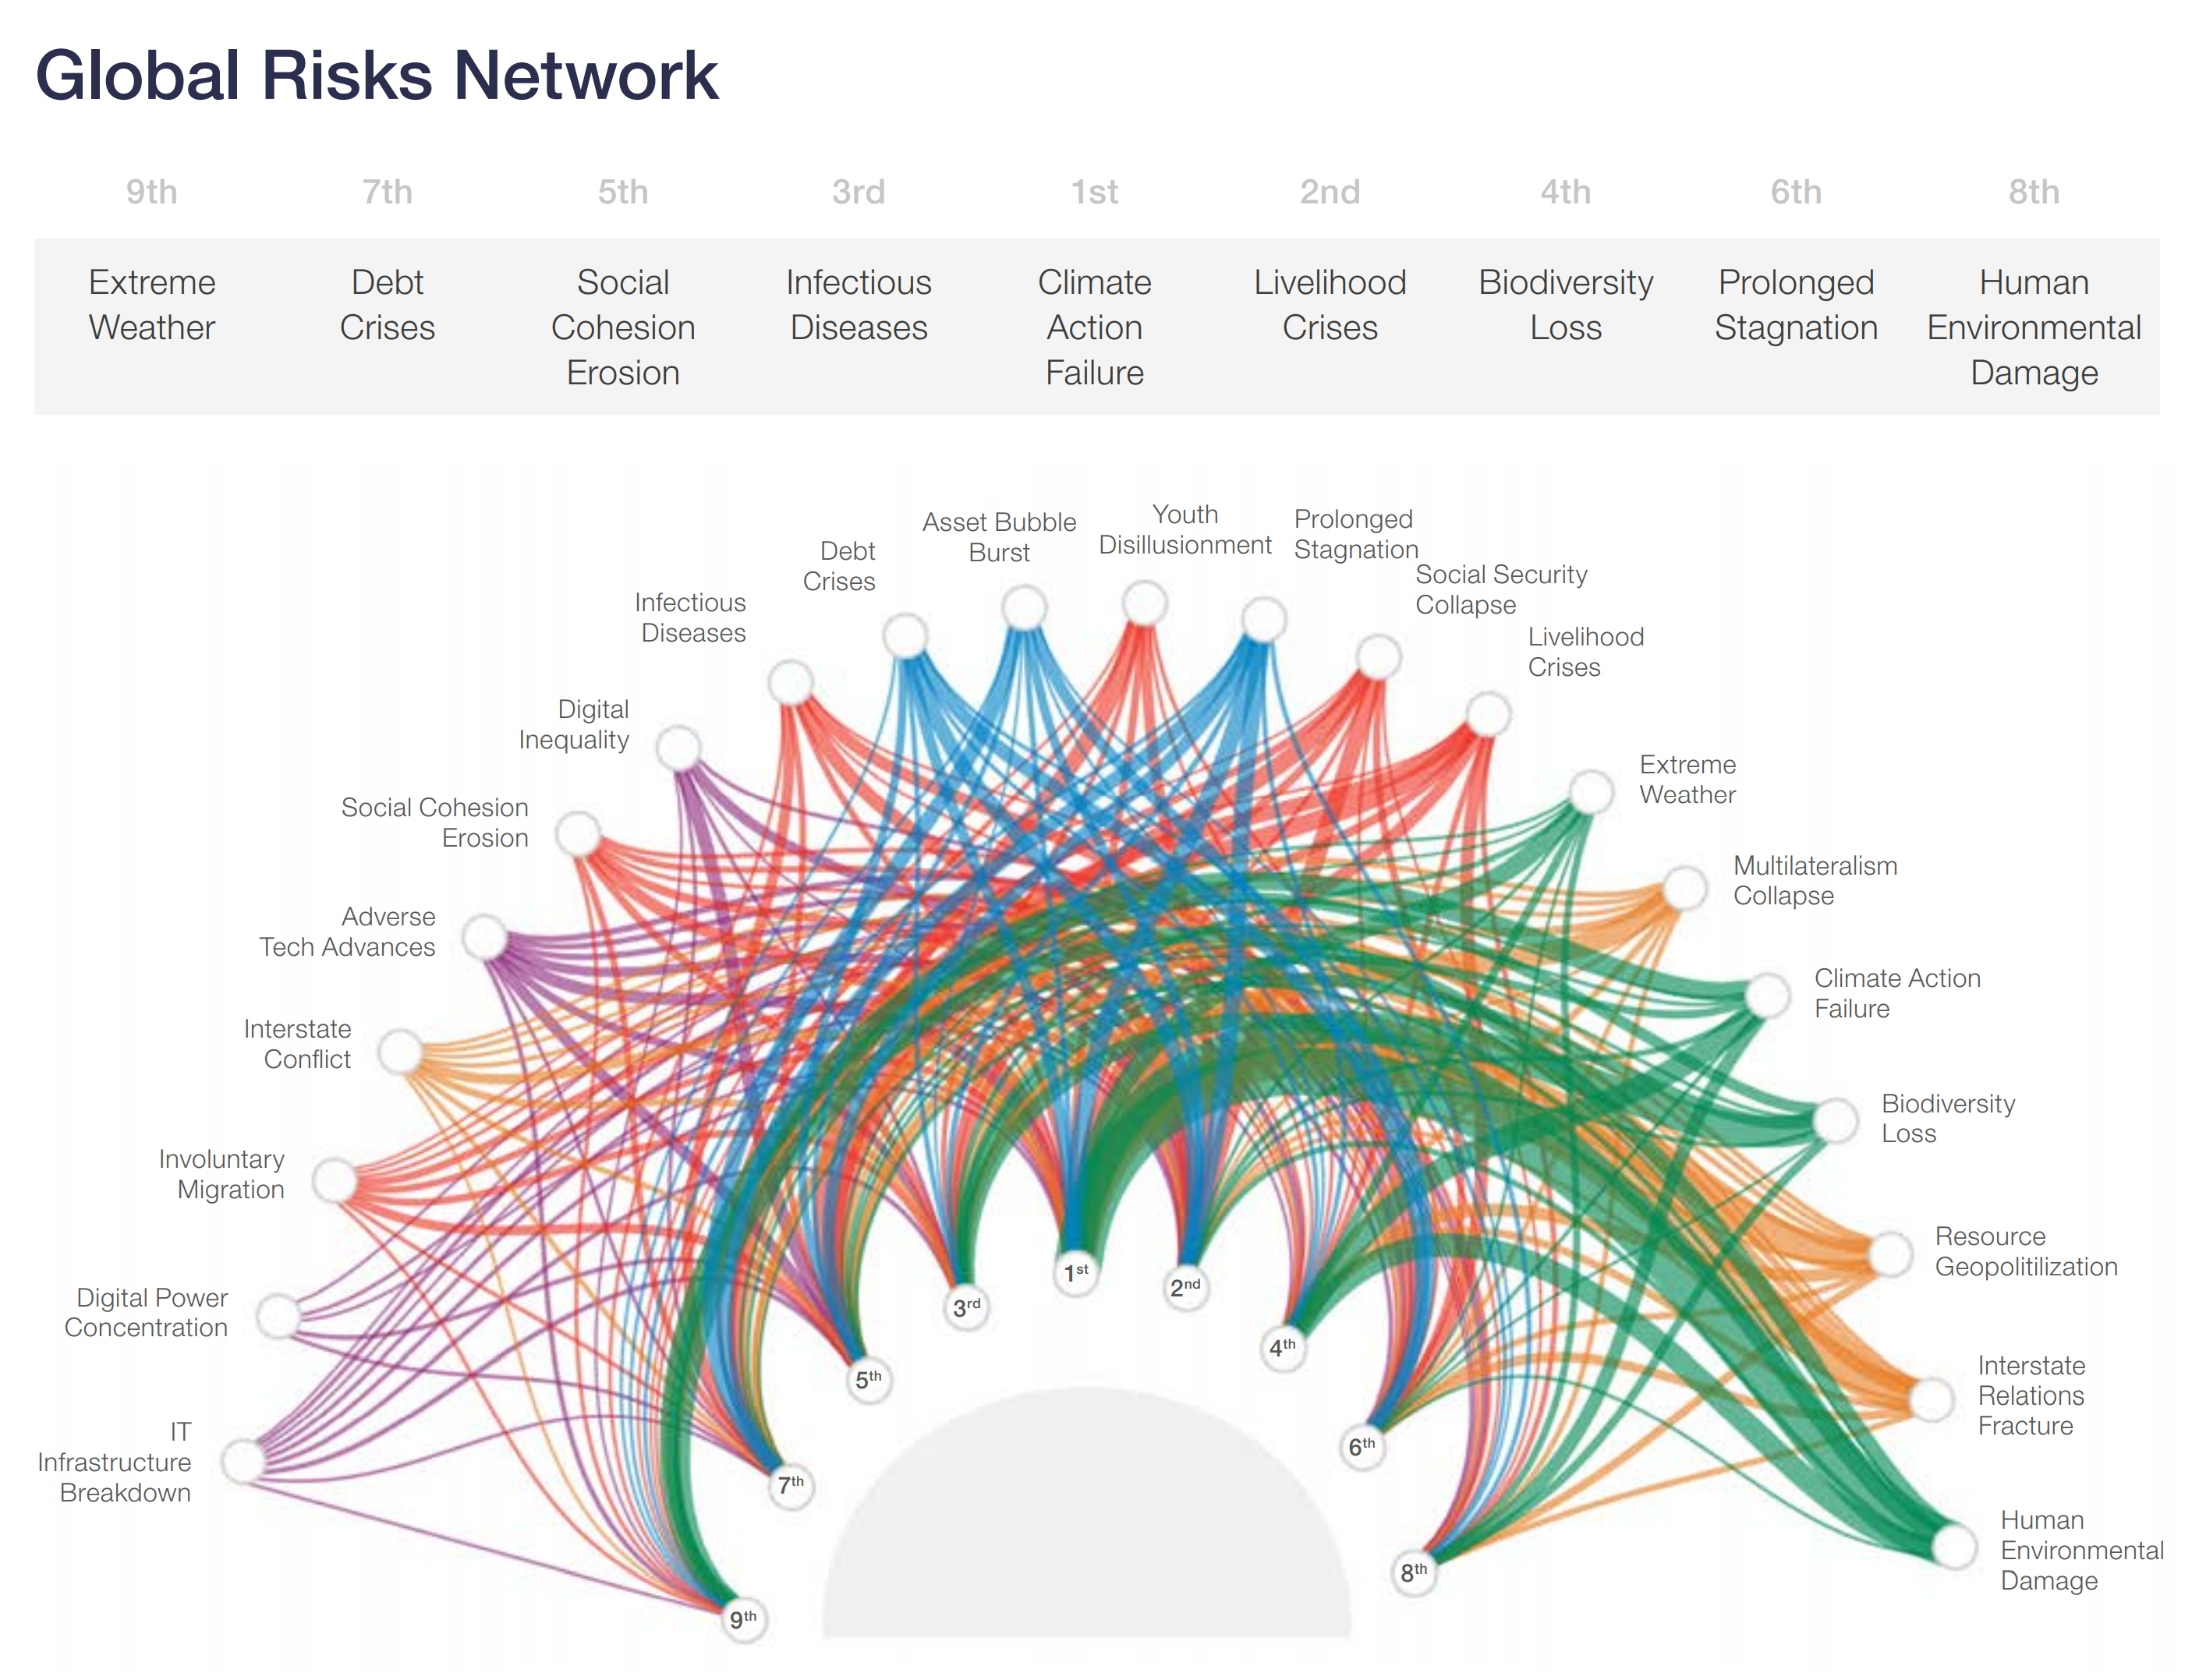 Results from the WEF Global Risks Perception Survey 2020. The Global Risks Network chart shows how respondents rank the most concerning risks globally and their drivers. Data: World Economic Forum Global Risks Perception Survey 2020 / The Global Risks Report 2021. Graphic: WEF